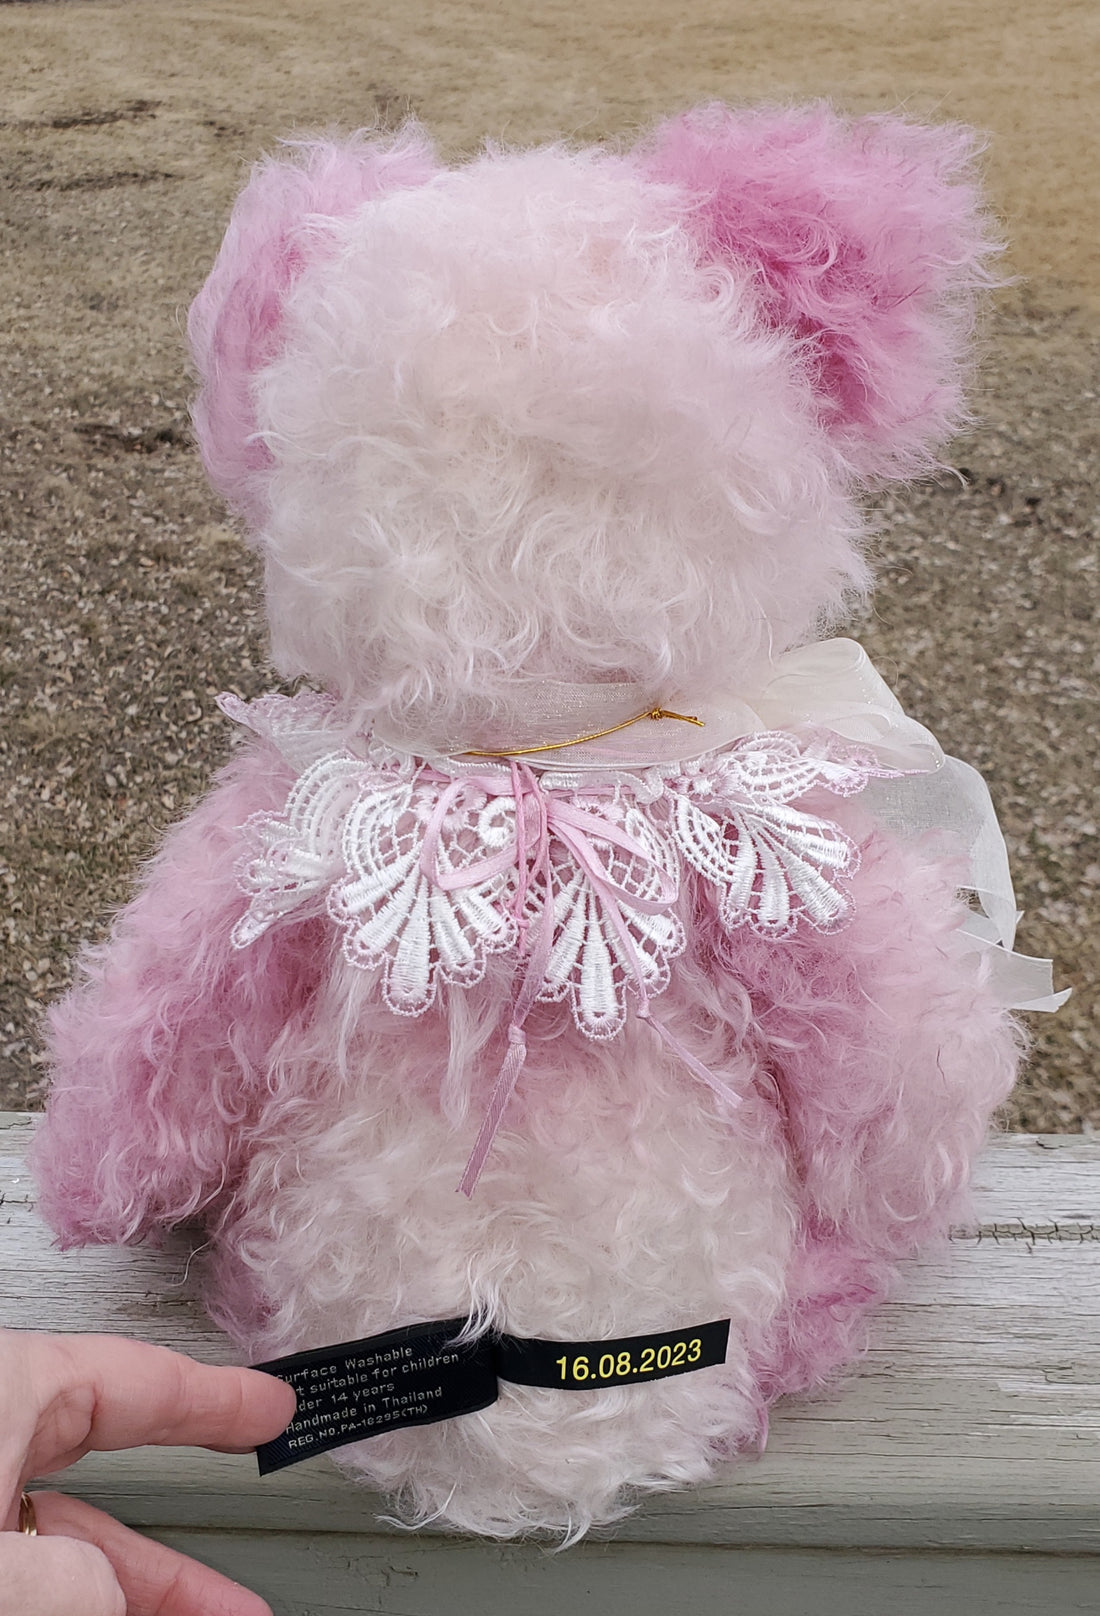 Burnett - 17.5" Curly Mohair - Charlie Bears' Isabelle Collection - 300 Made!